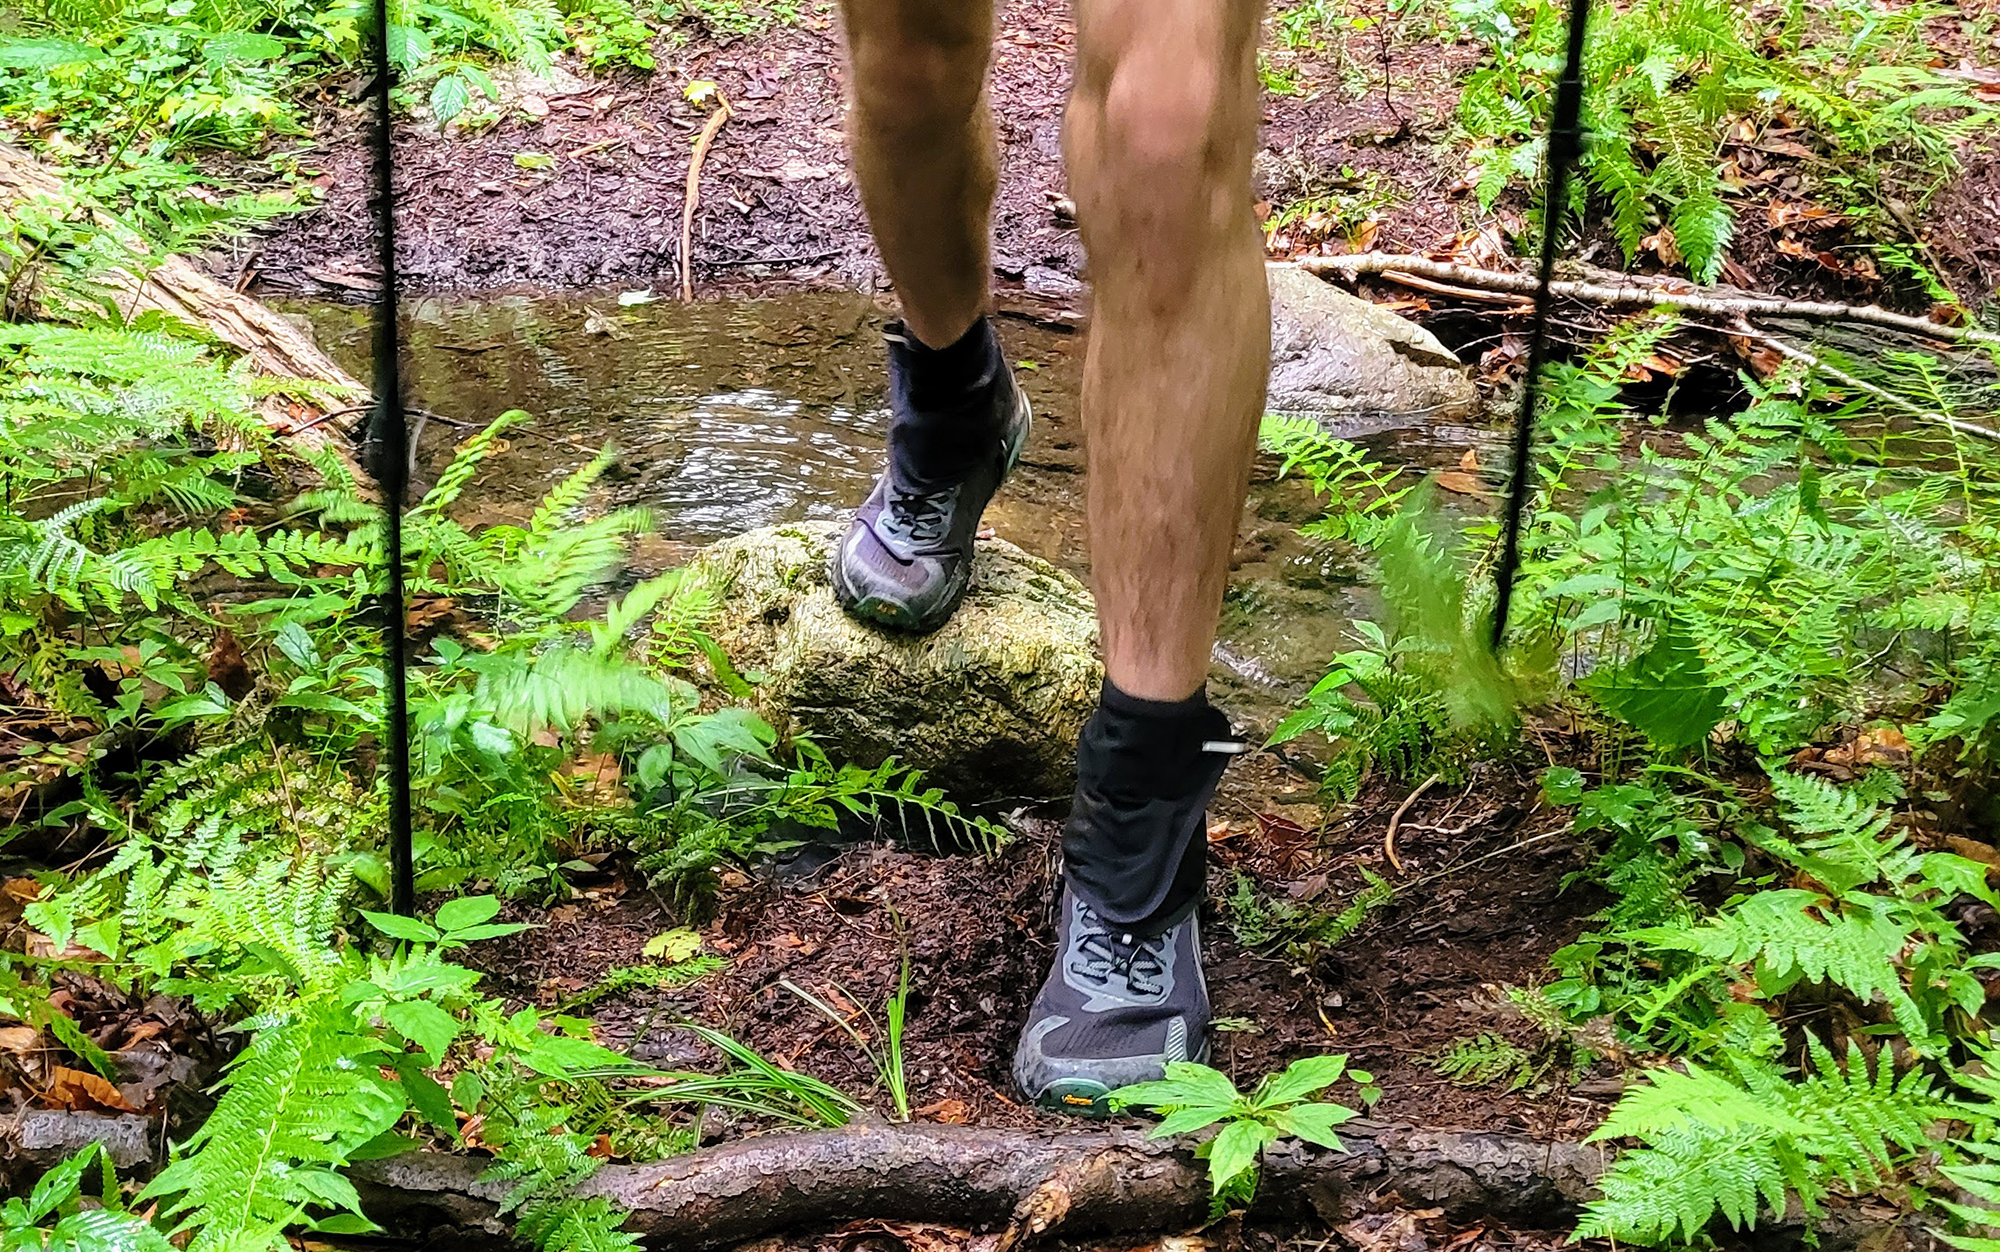 The Black Diamond gaiters kept out mud and moisture during a particularly damp August.